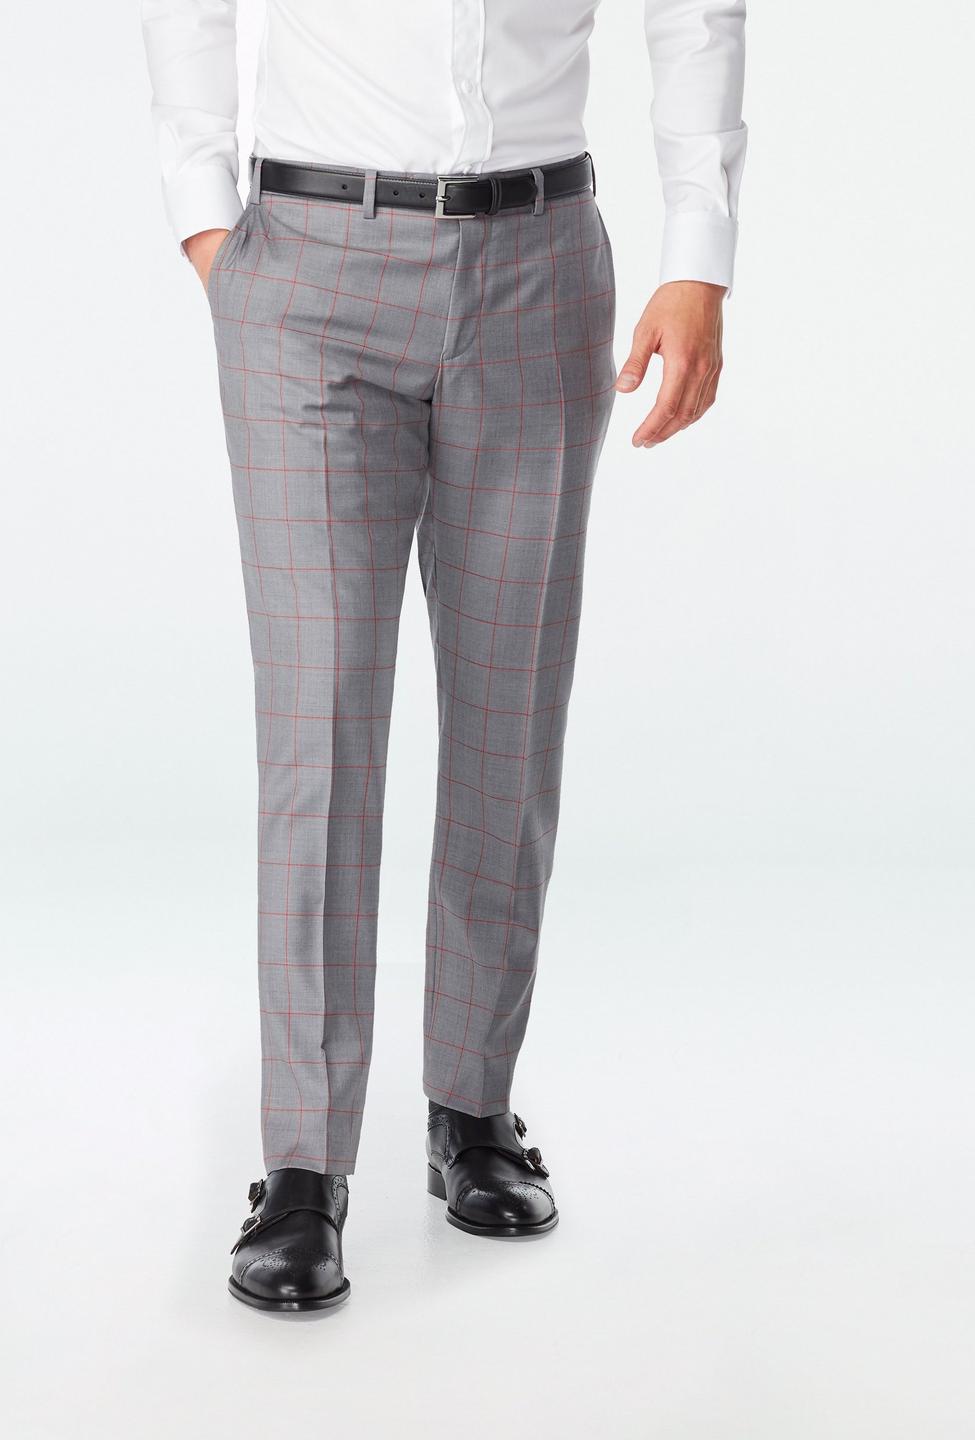 Gray pants - Malvern Checked Design from Seasonal Indochino Collection